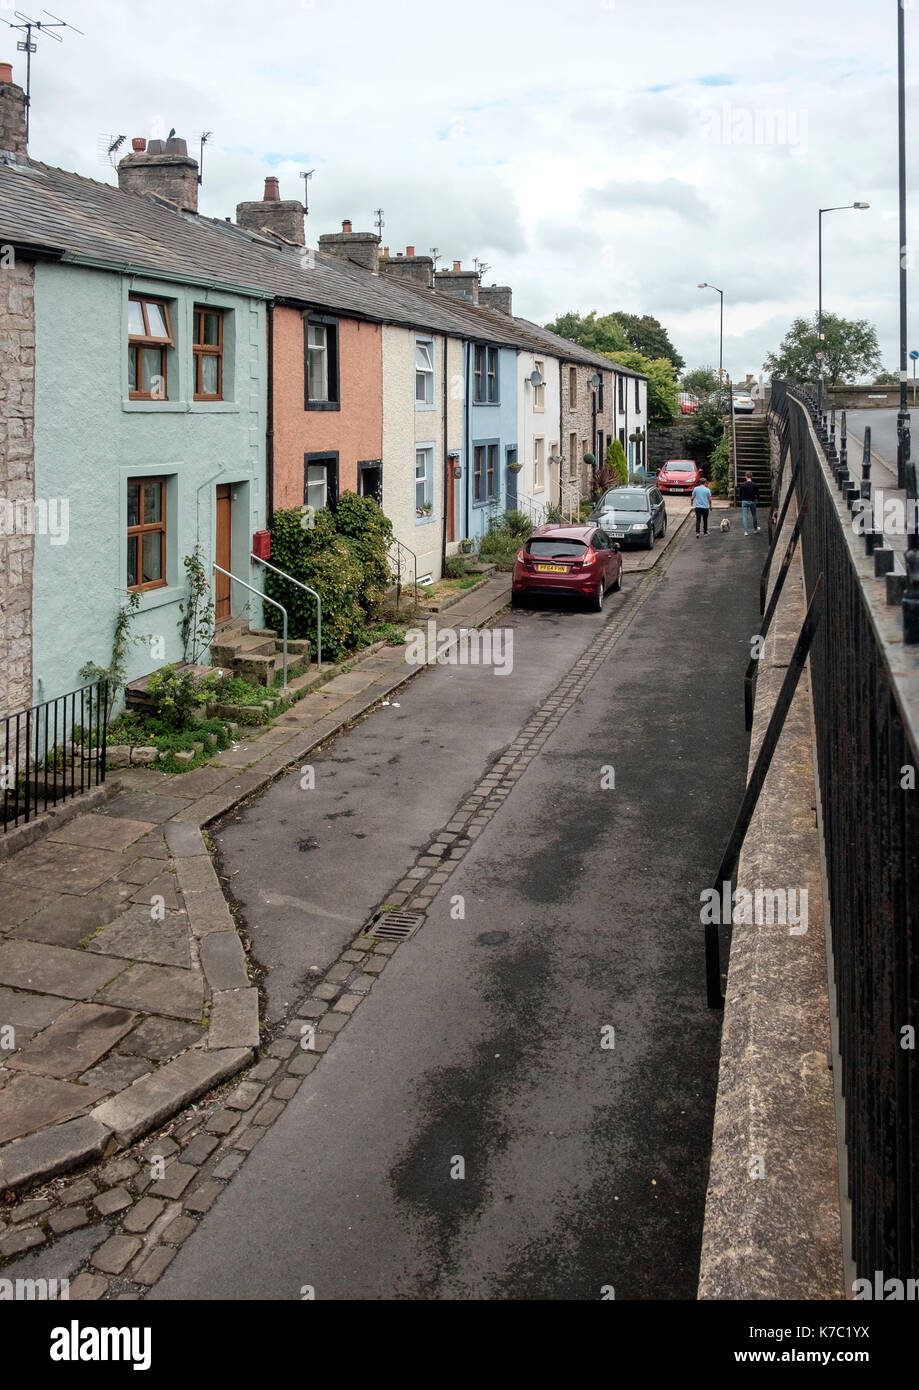 Terraced houses in the Bawdlands General Improvement area of Clitheroe Stock Photo